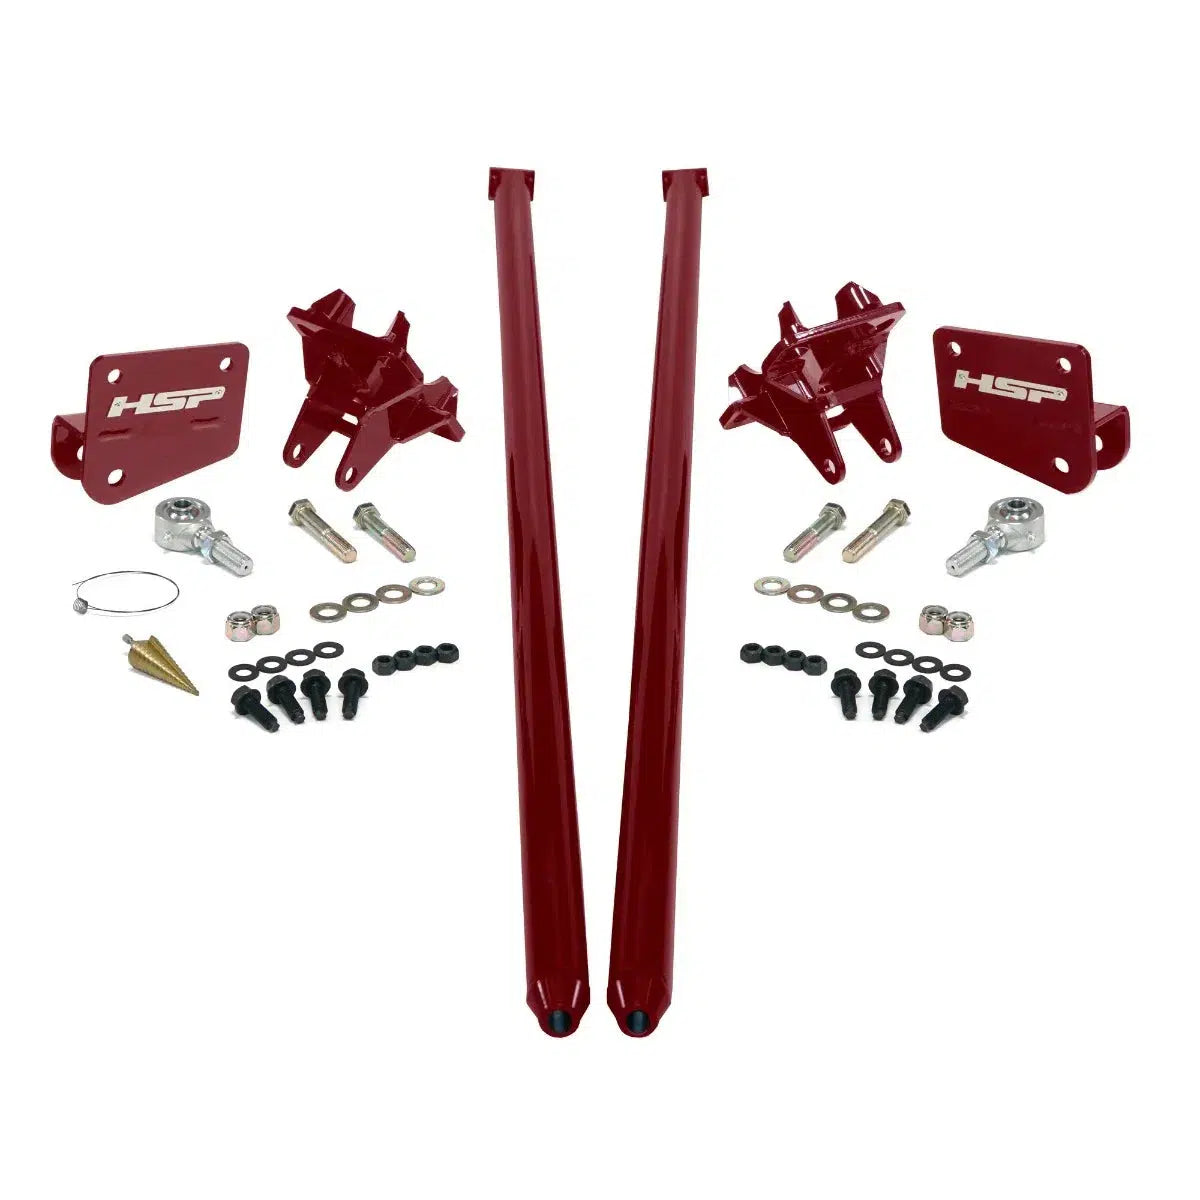 2011-2017 Powerstroke Traction Bars (CCLB) (HSP-P-435-2-4-HSP)-Traction Bars-HSP Diesel-HSP-P-435-2-4-HSP-CR-Dirty Diesel Customs